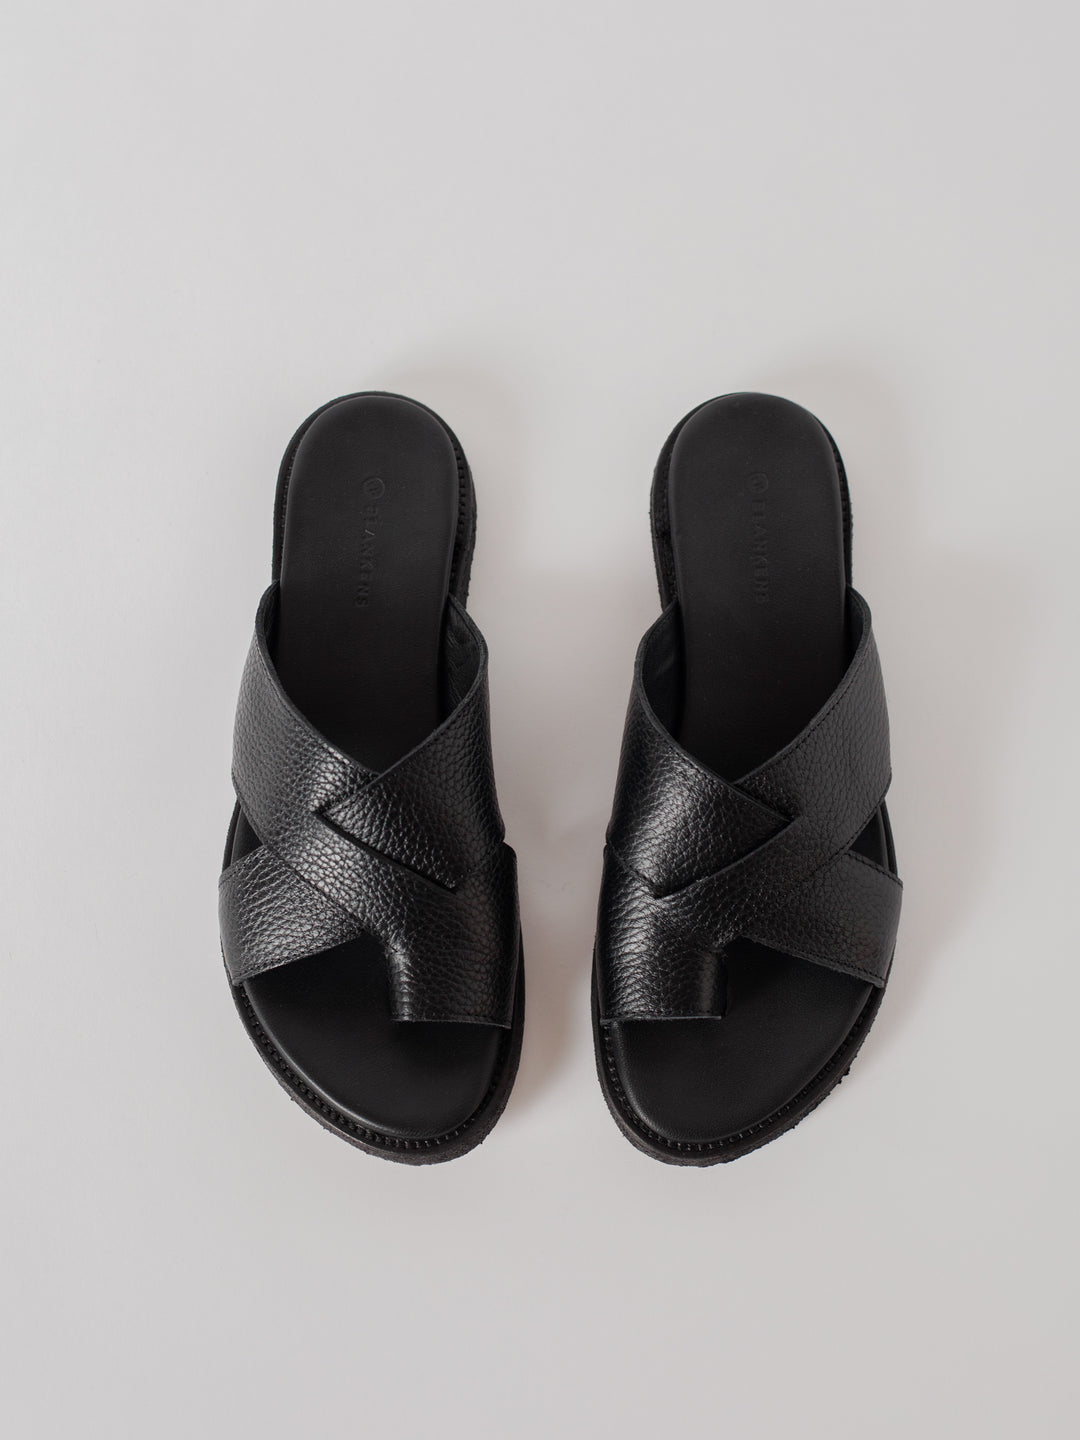 Blankens The Mette Eco black leather sandals with toe detail